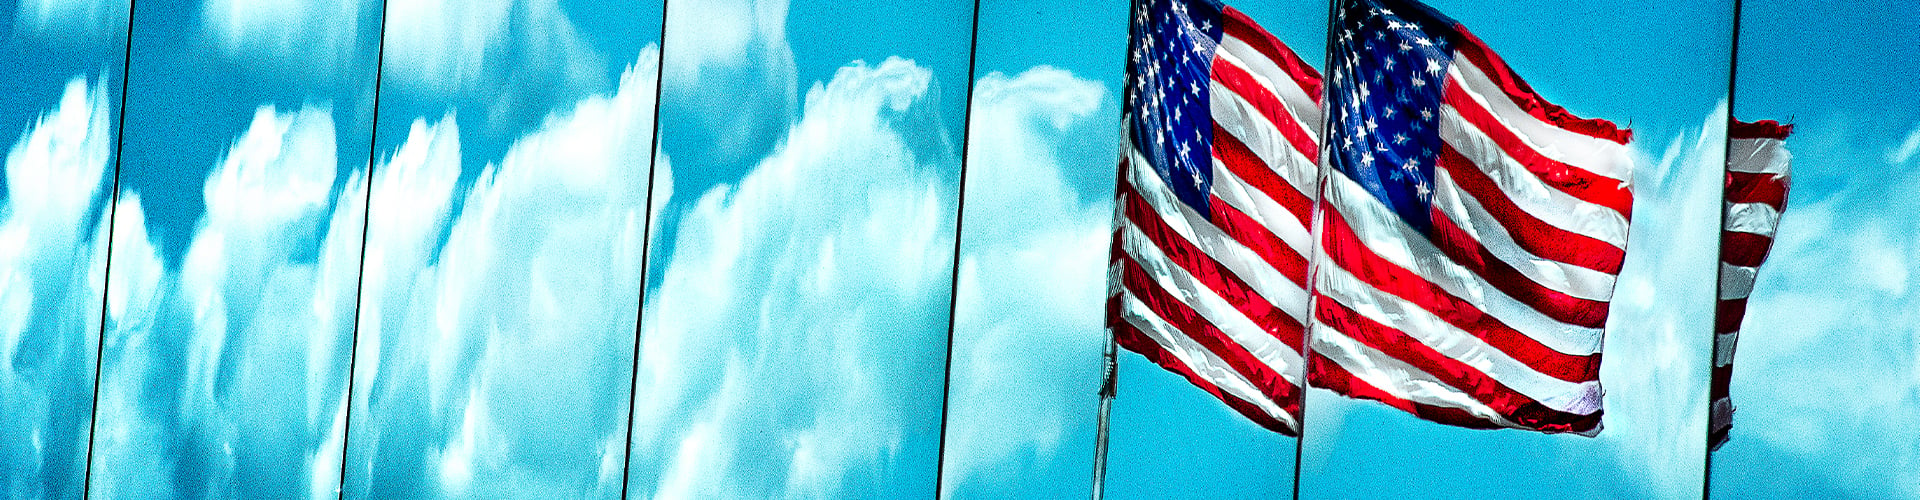 American flag against background of clouds